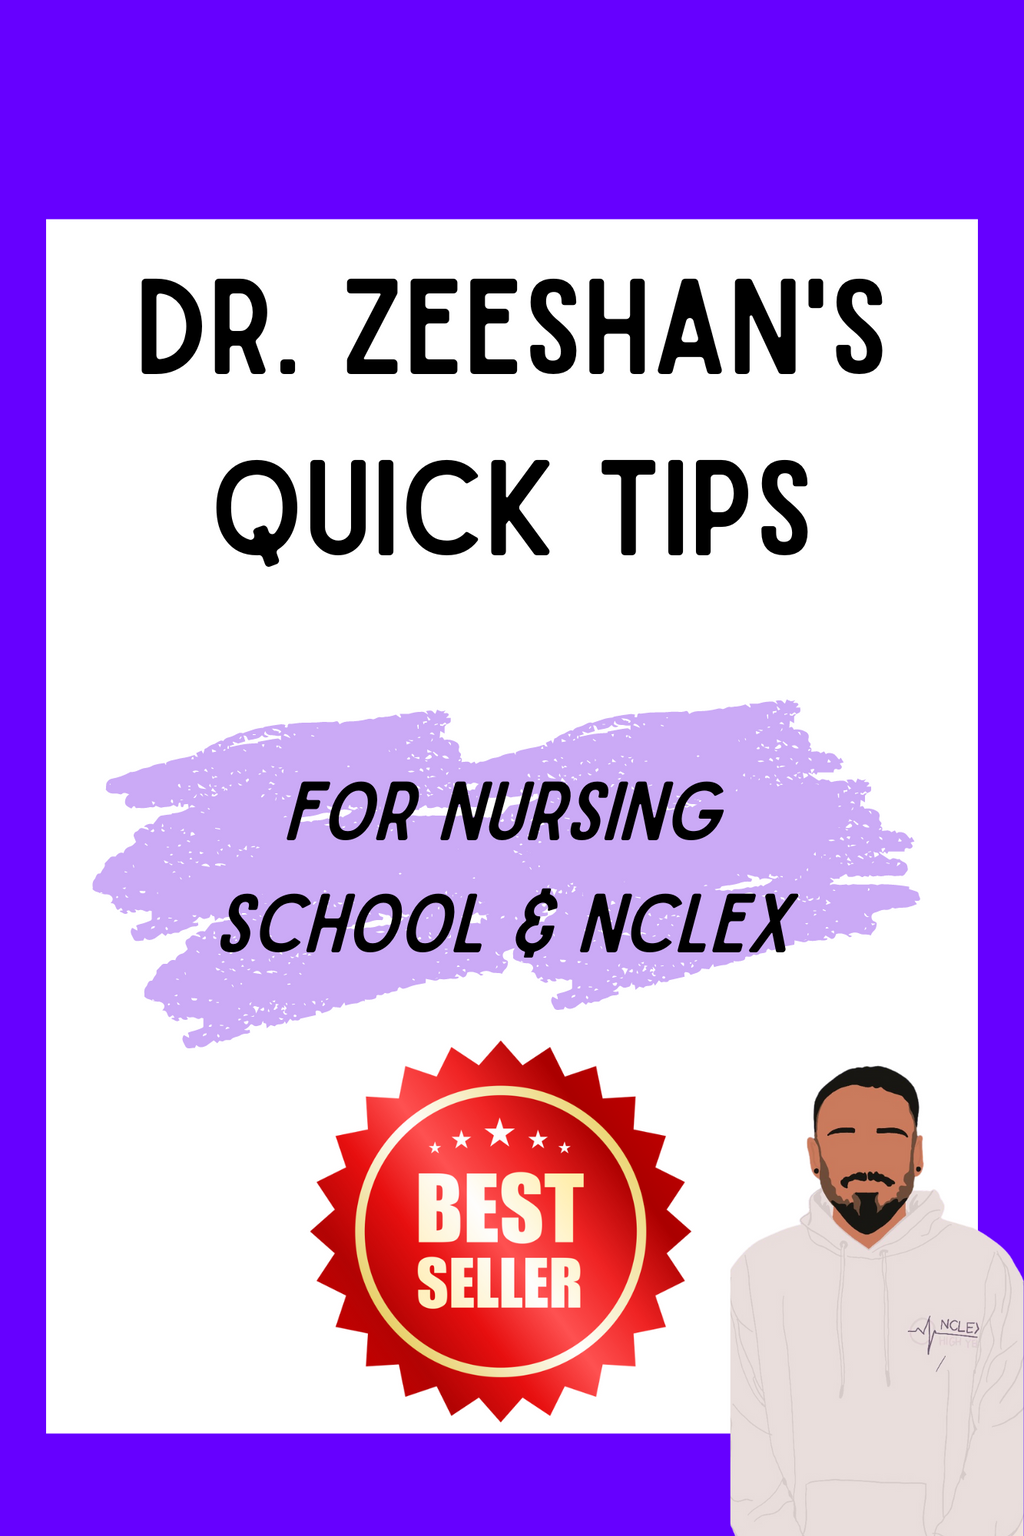 DR. ZEESHAN'S QUICK TIPS FOR THE NCLEX BOOK + NHY MYSTERY STICKER PACK￼